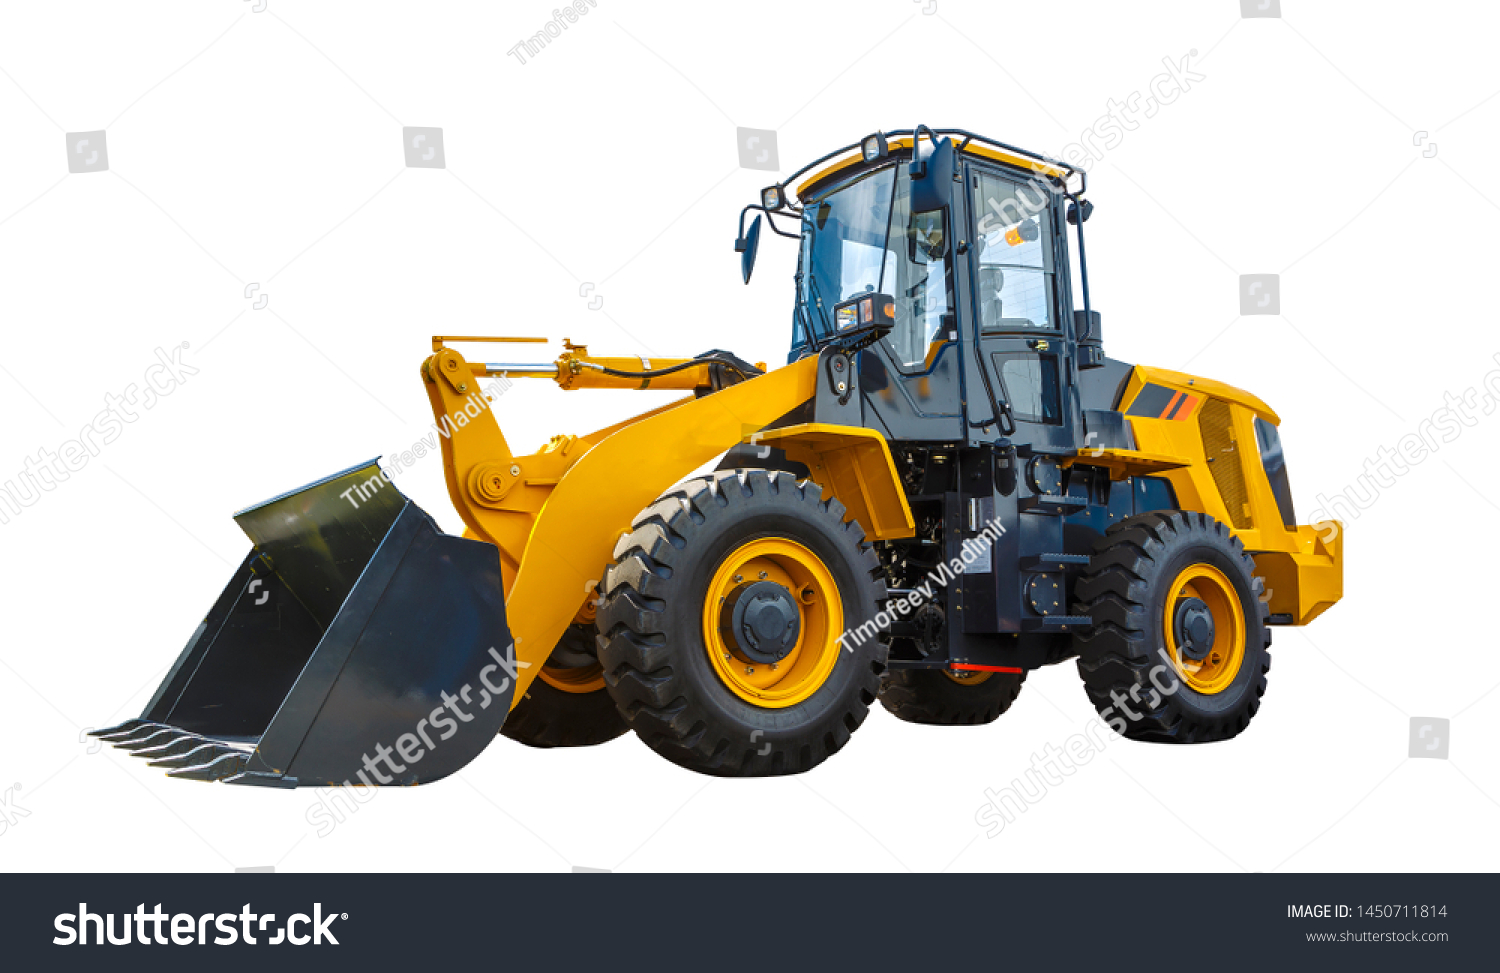 Grader and Excavator Construction Equipment with clipping path isolated on white background #1450711814